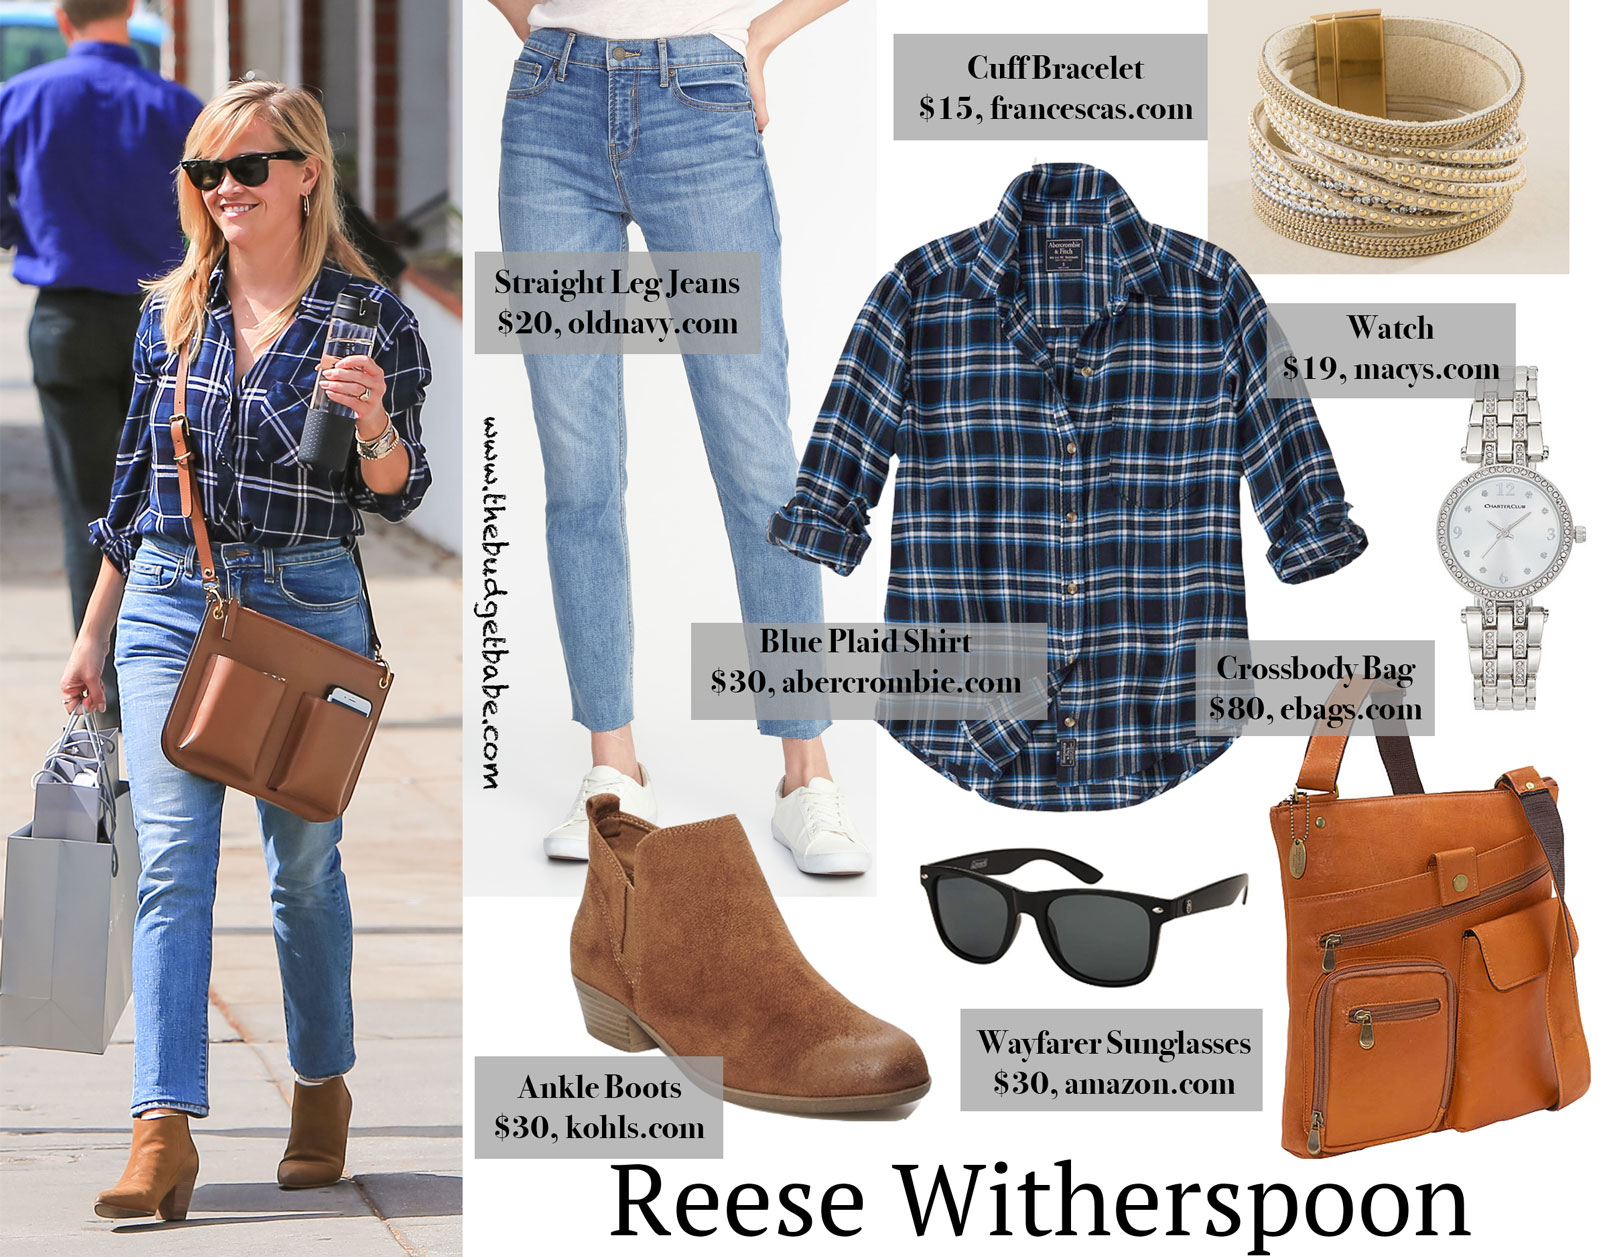 Reese Witherspoon Plaid Shirt and Cognac Ankle Boots Look for Less